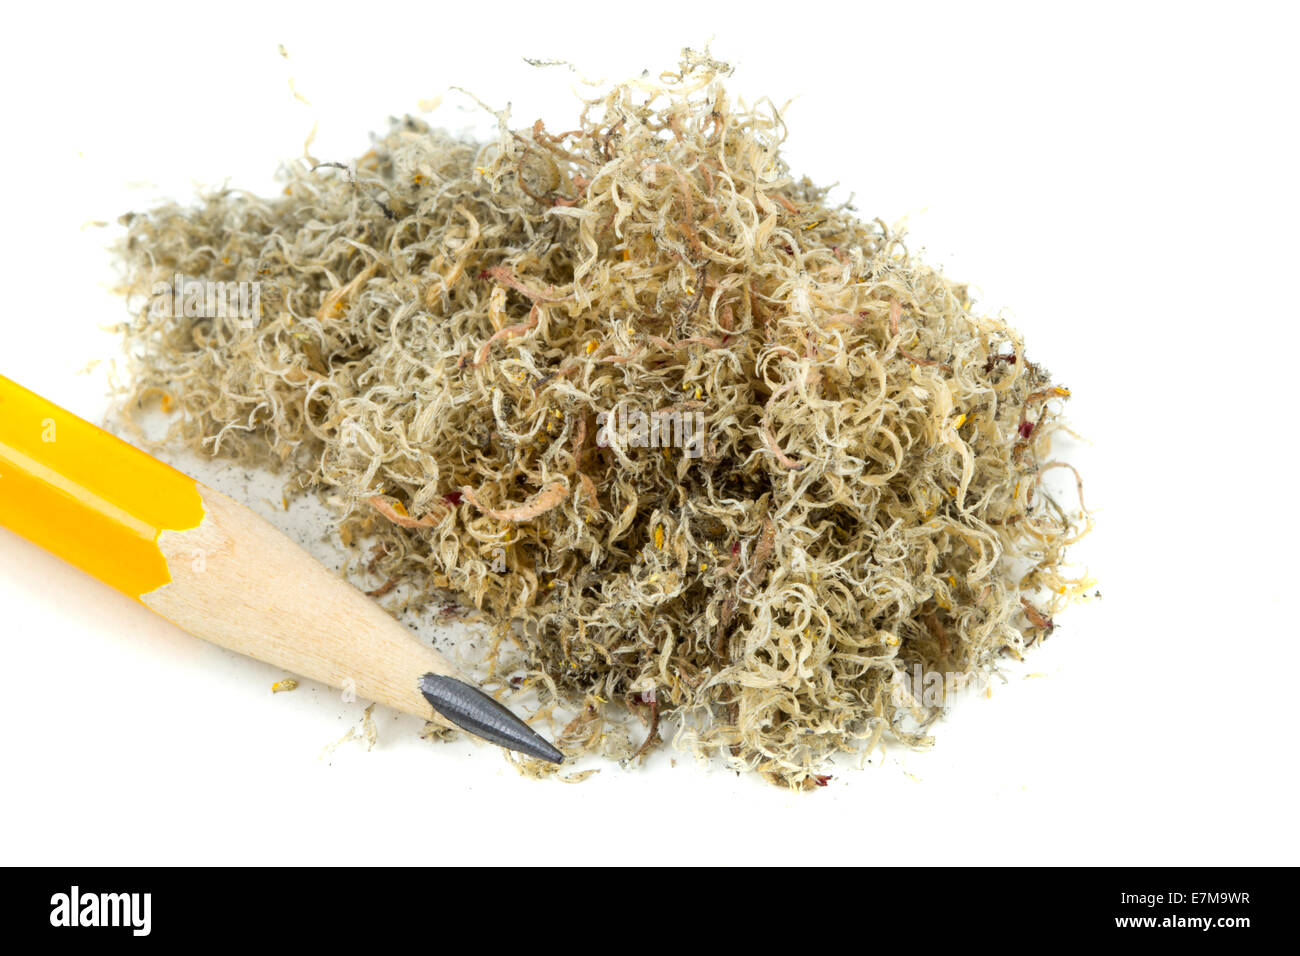 Pencil with sharpening shavings on white background Stock Photo